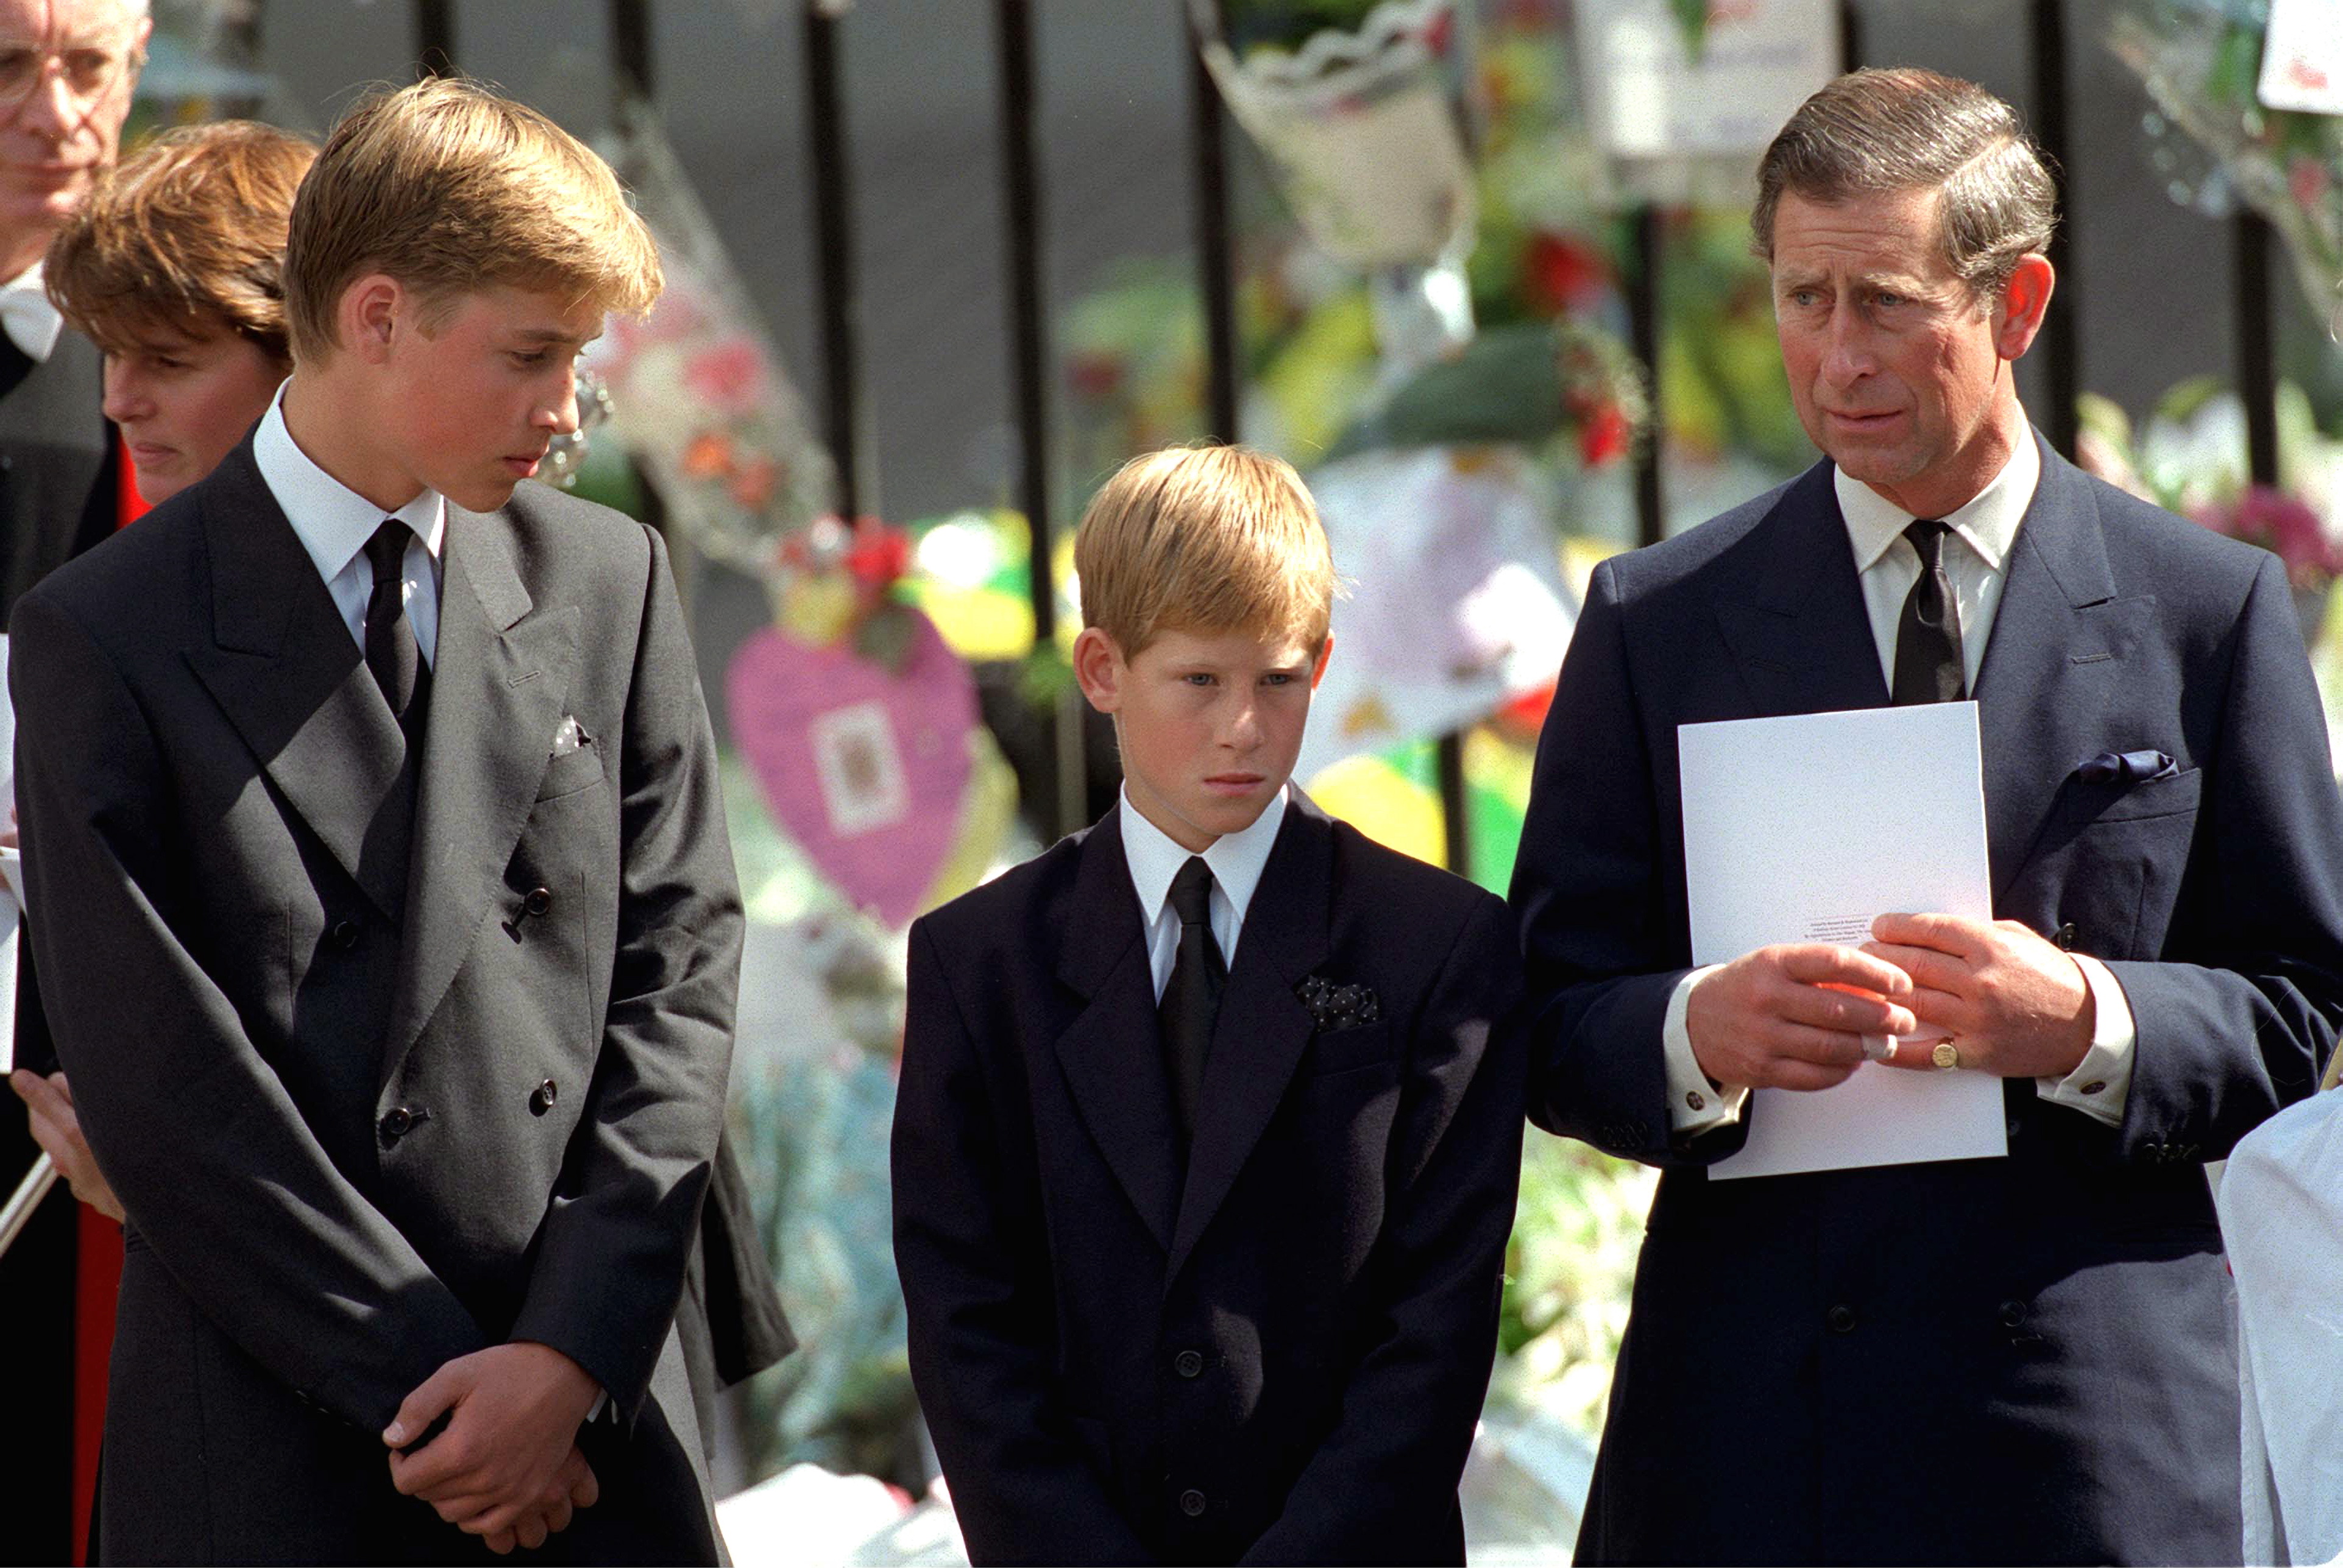 Prince William And Prince Harry With Prince Charles Holding A Funeral Programme At Westminster Abbey For The Funeral Of Diana, Princess Of Wales | Source: Getty Images